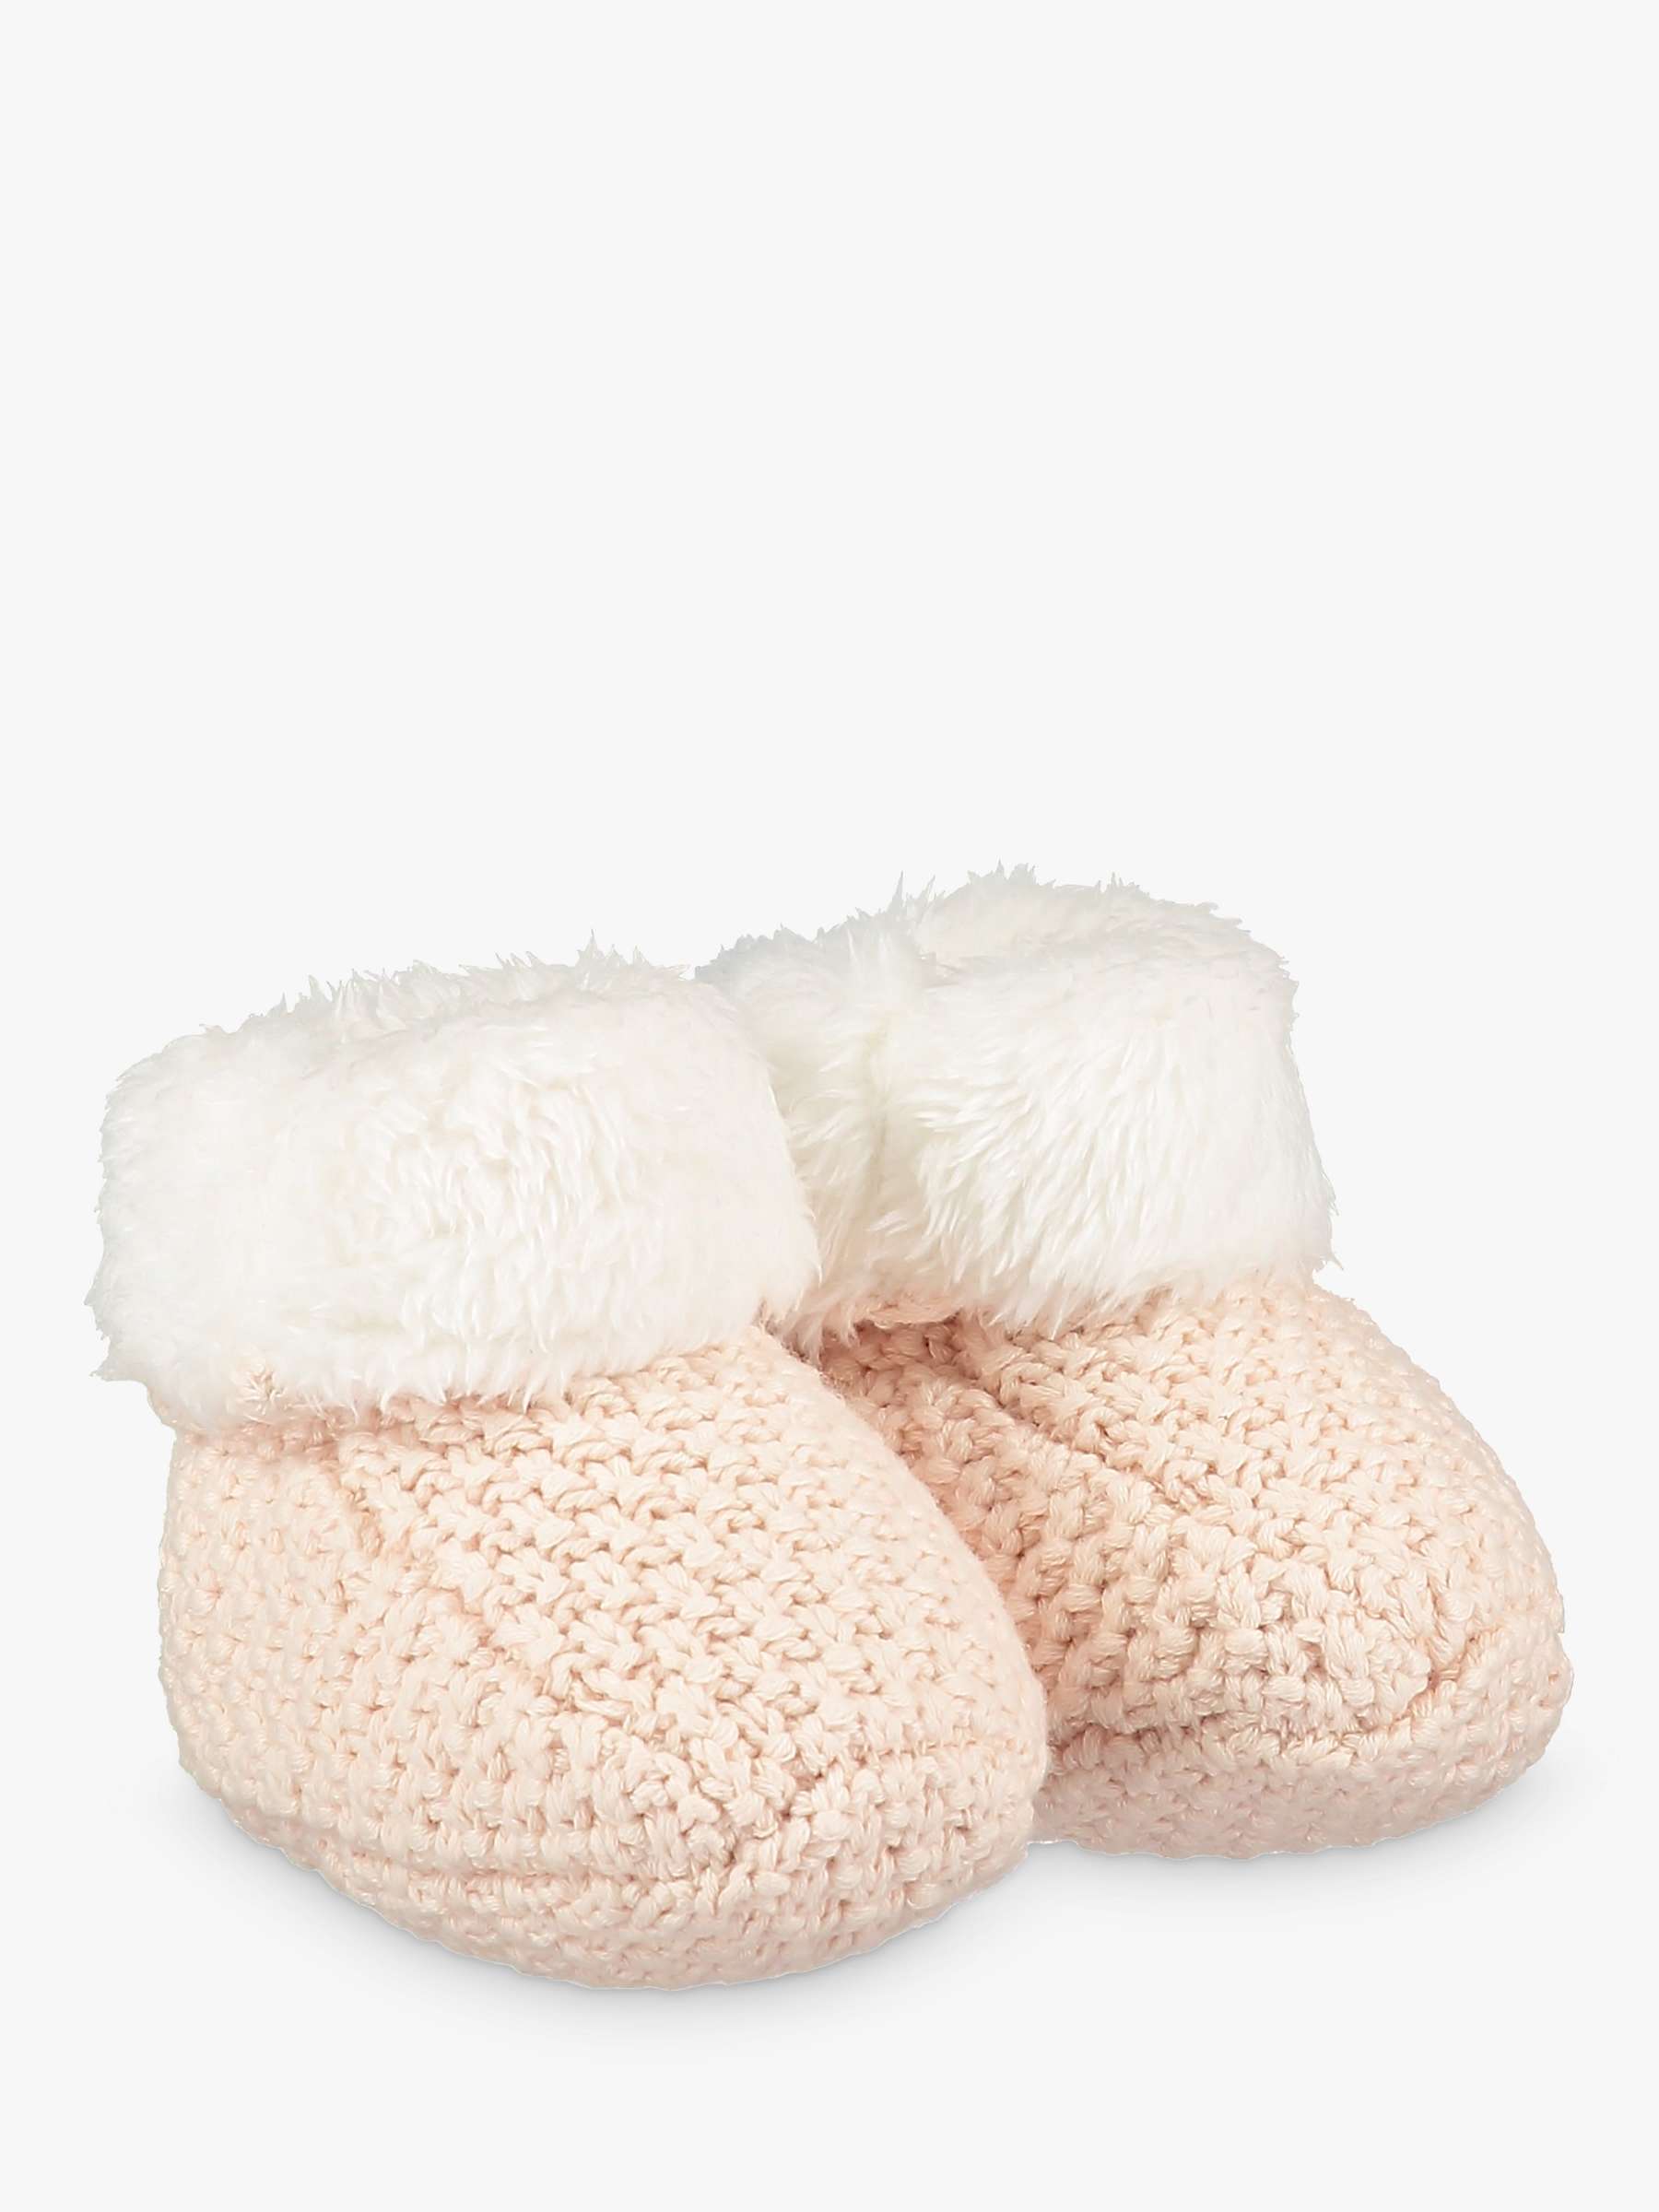 Buy The Little Tailor Baby Knitted Booties, Light Pink Online at johnlewis.com